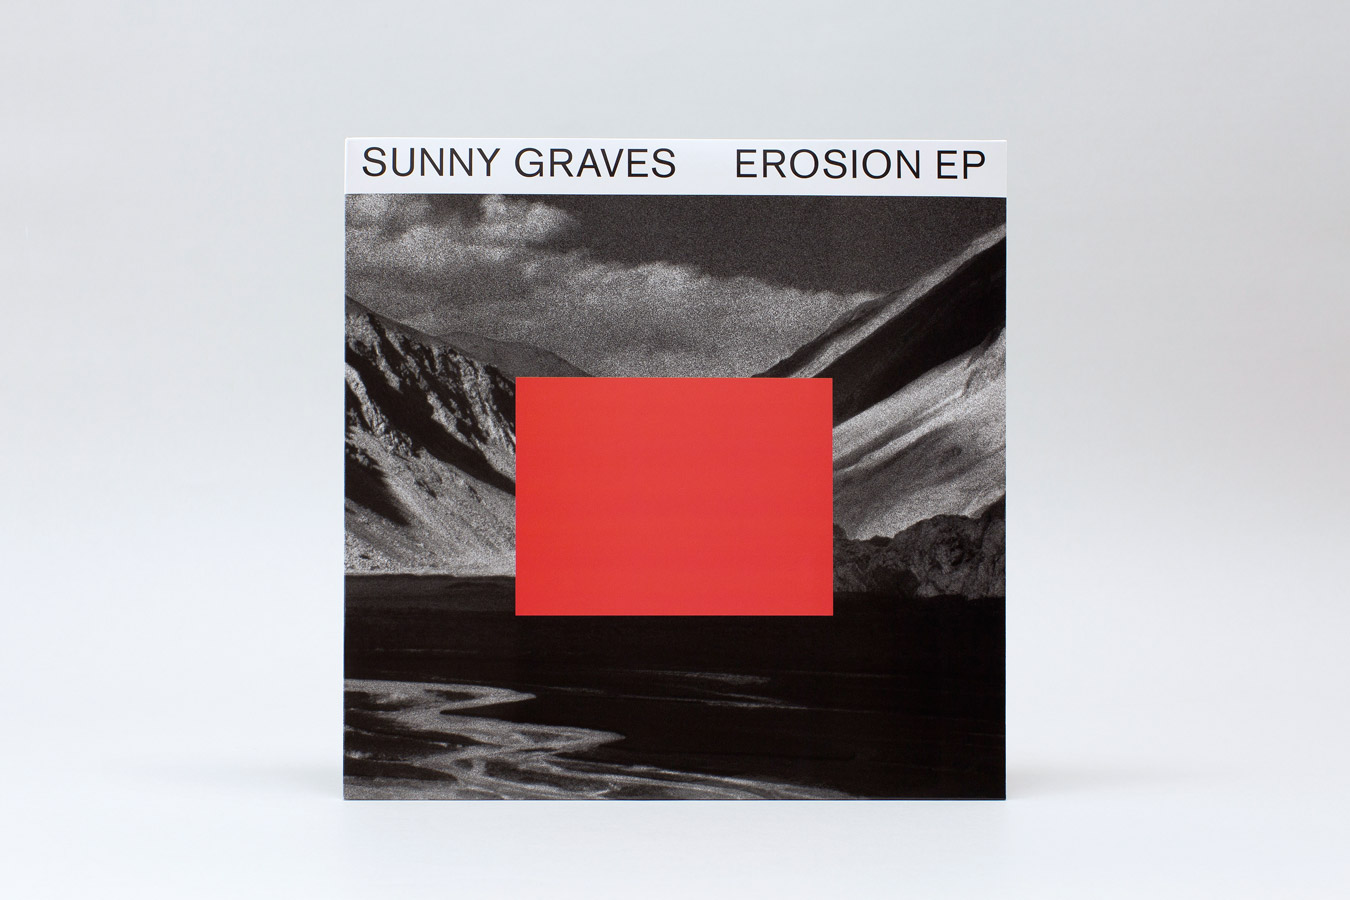 sunny-graves-erosion-ep-photo-front-1350x900-72ppi-web-lo-res